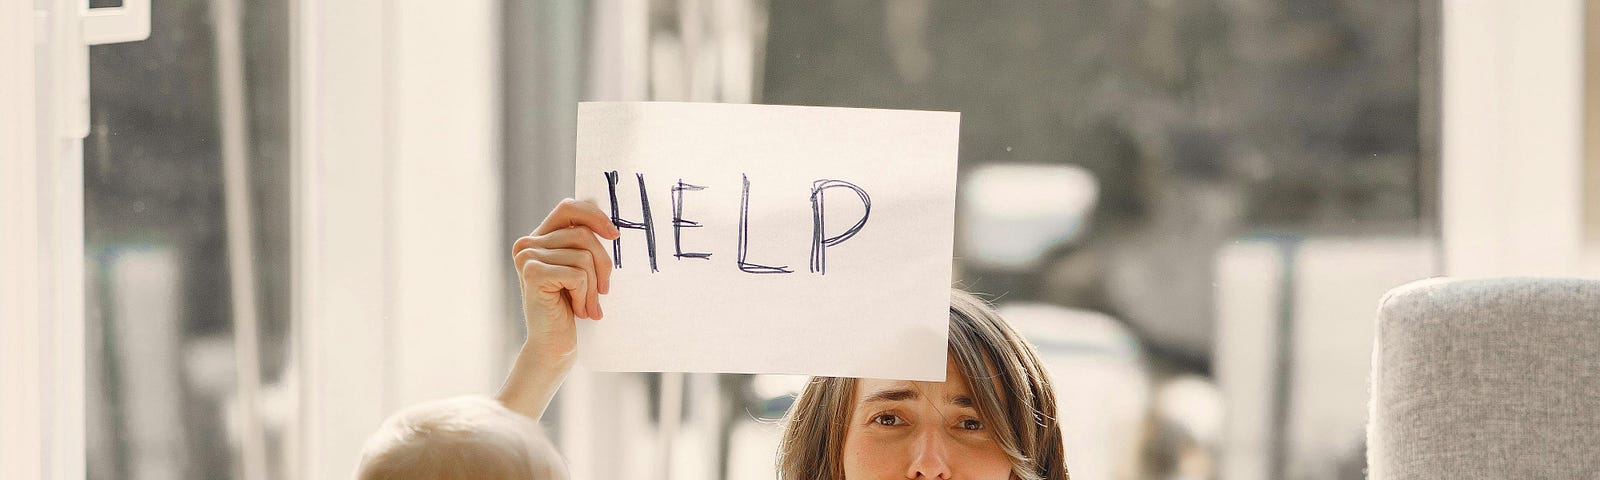 Stressed out single parent holding a sign asking for help.